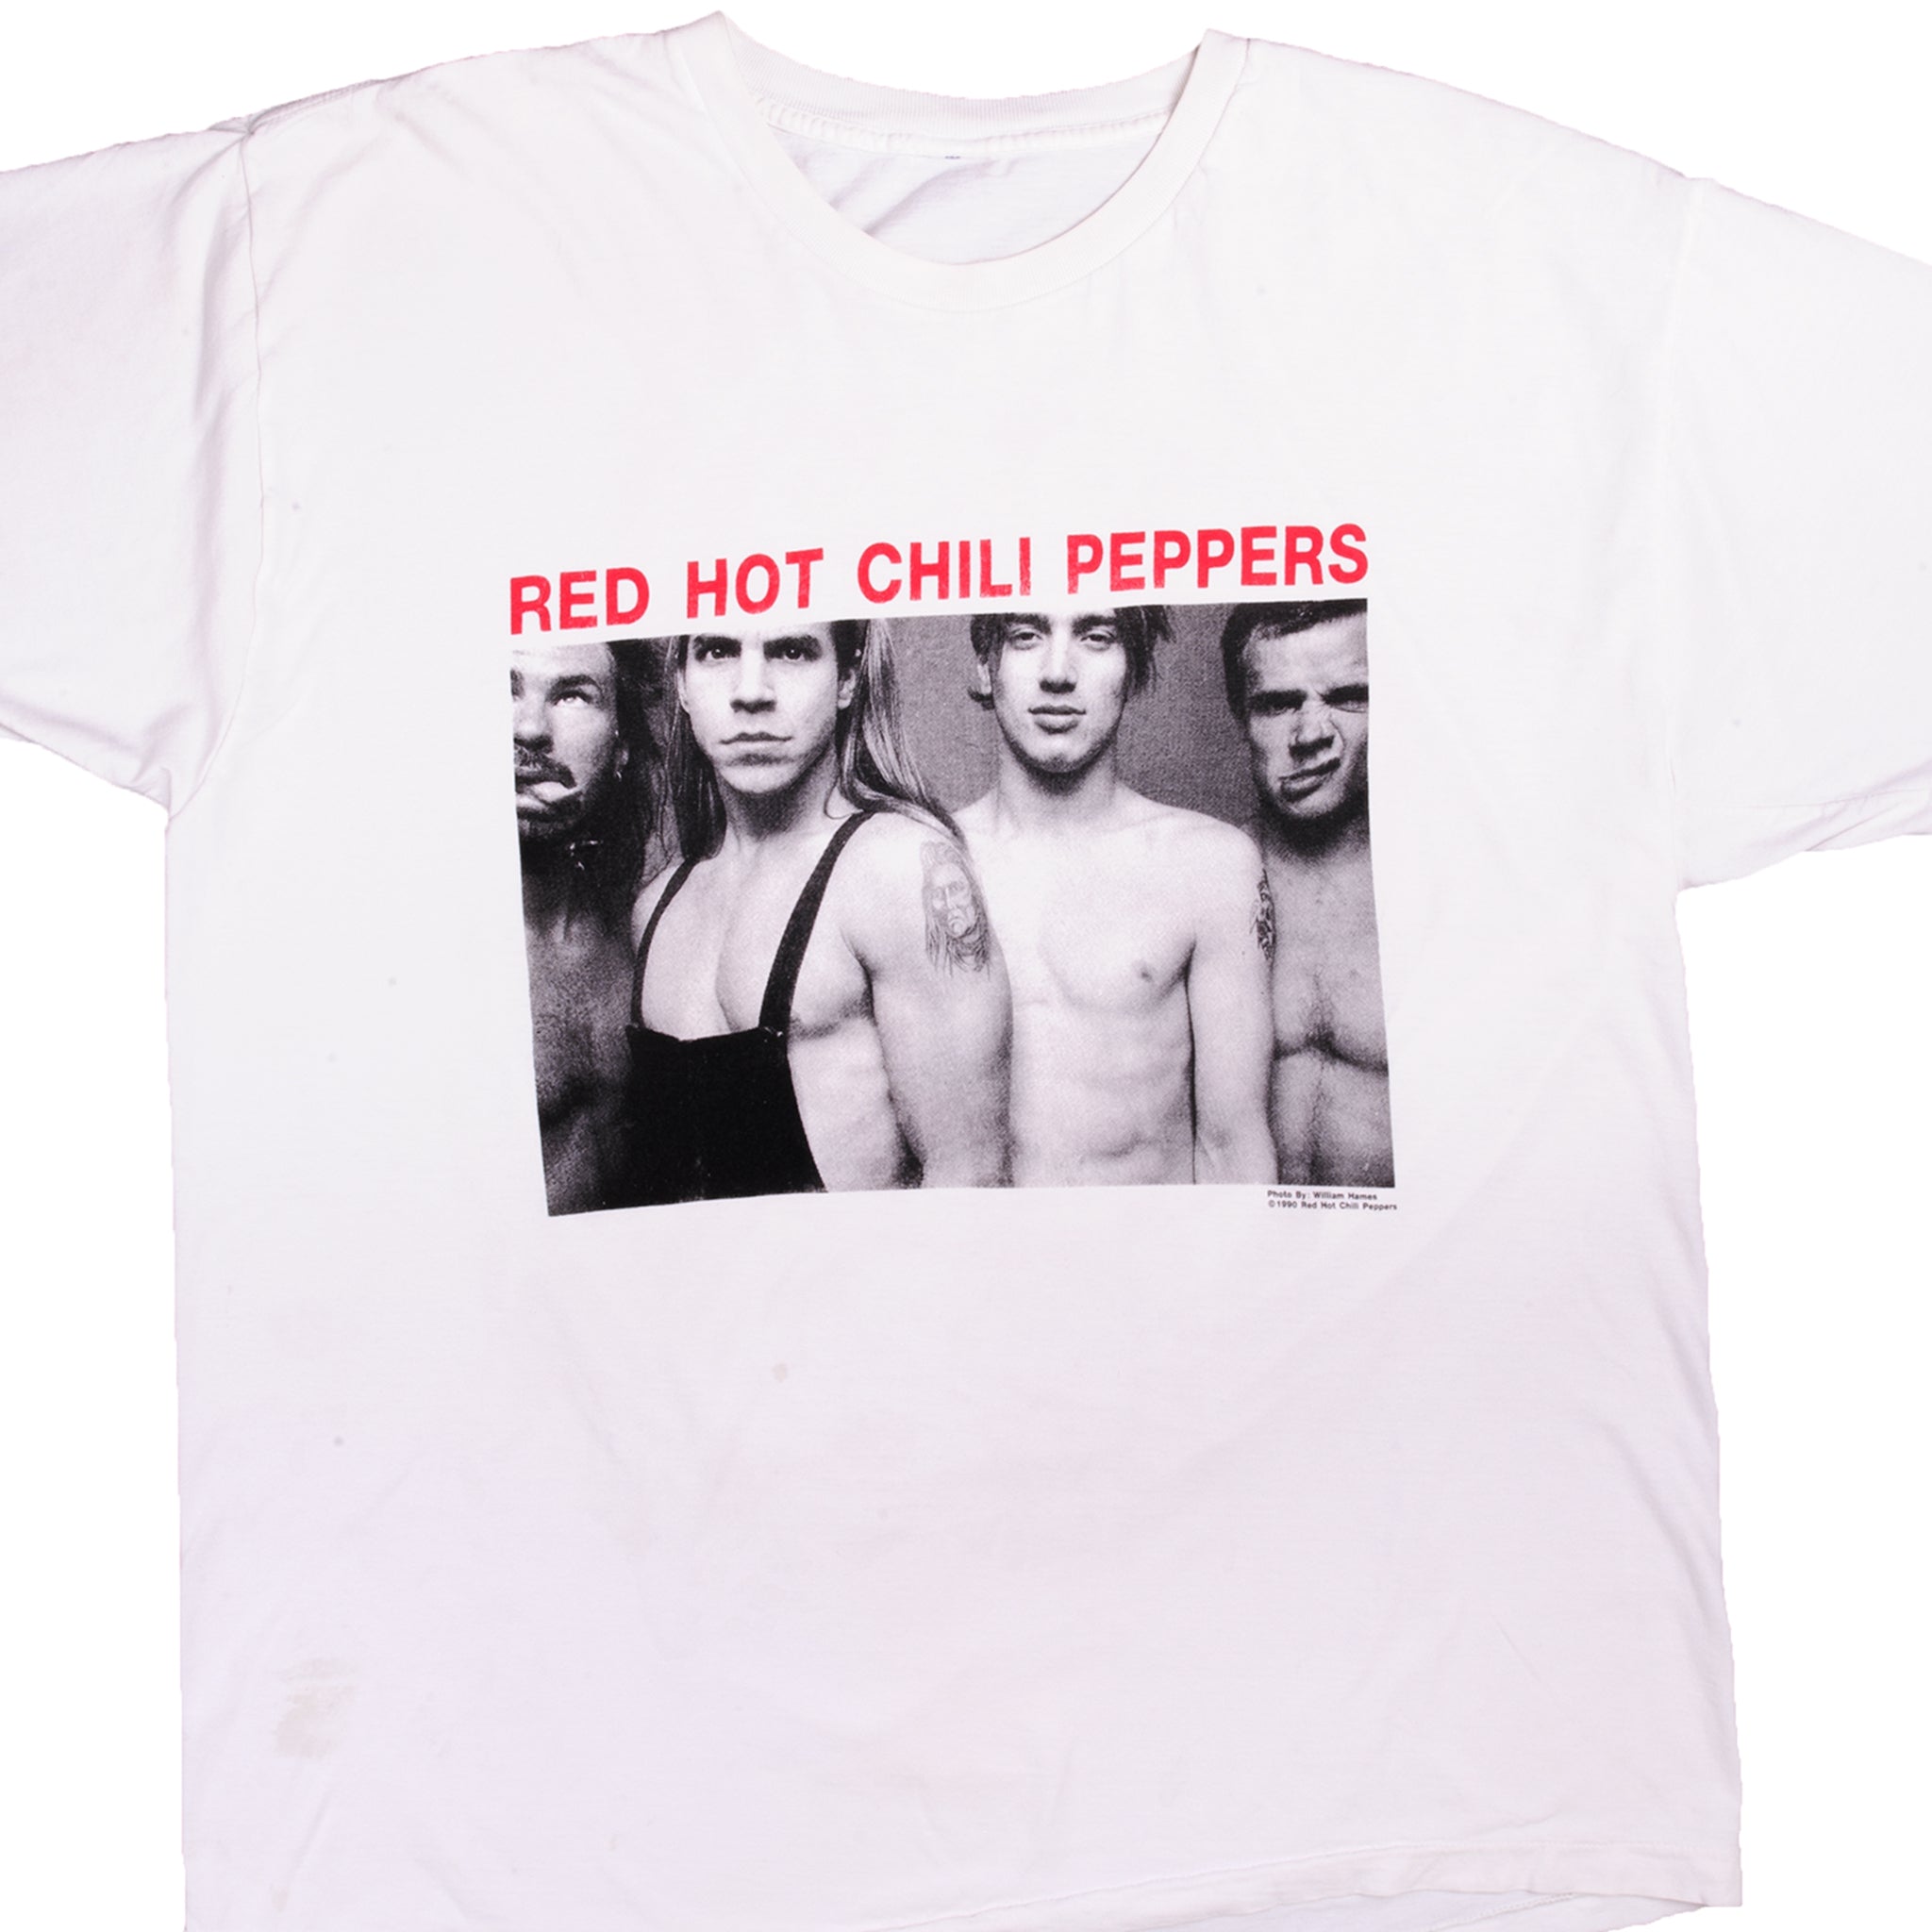 VINTAGE RED HOT CHILI PEPPERS TEE SHIRT 1990 SIZE XL